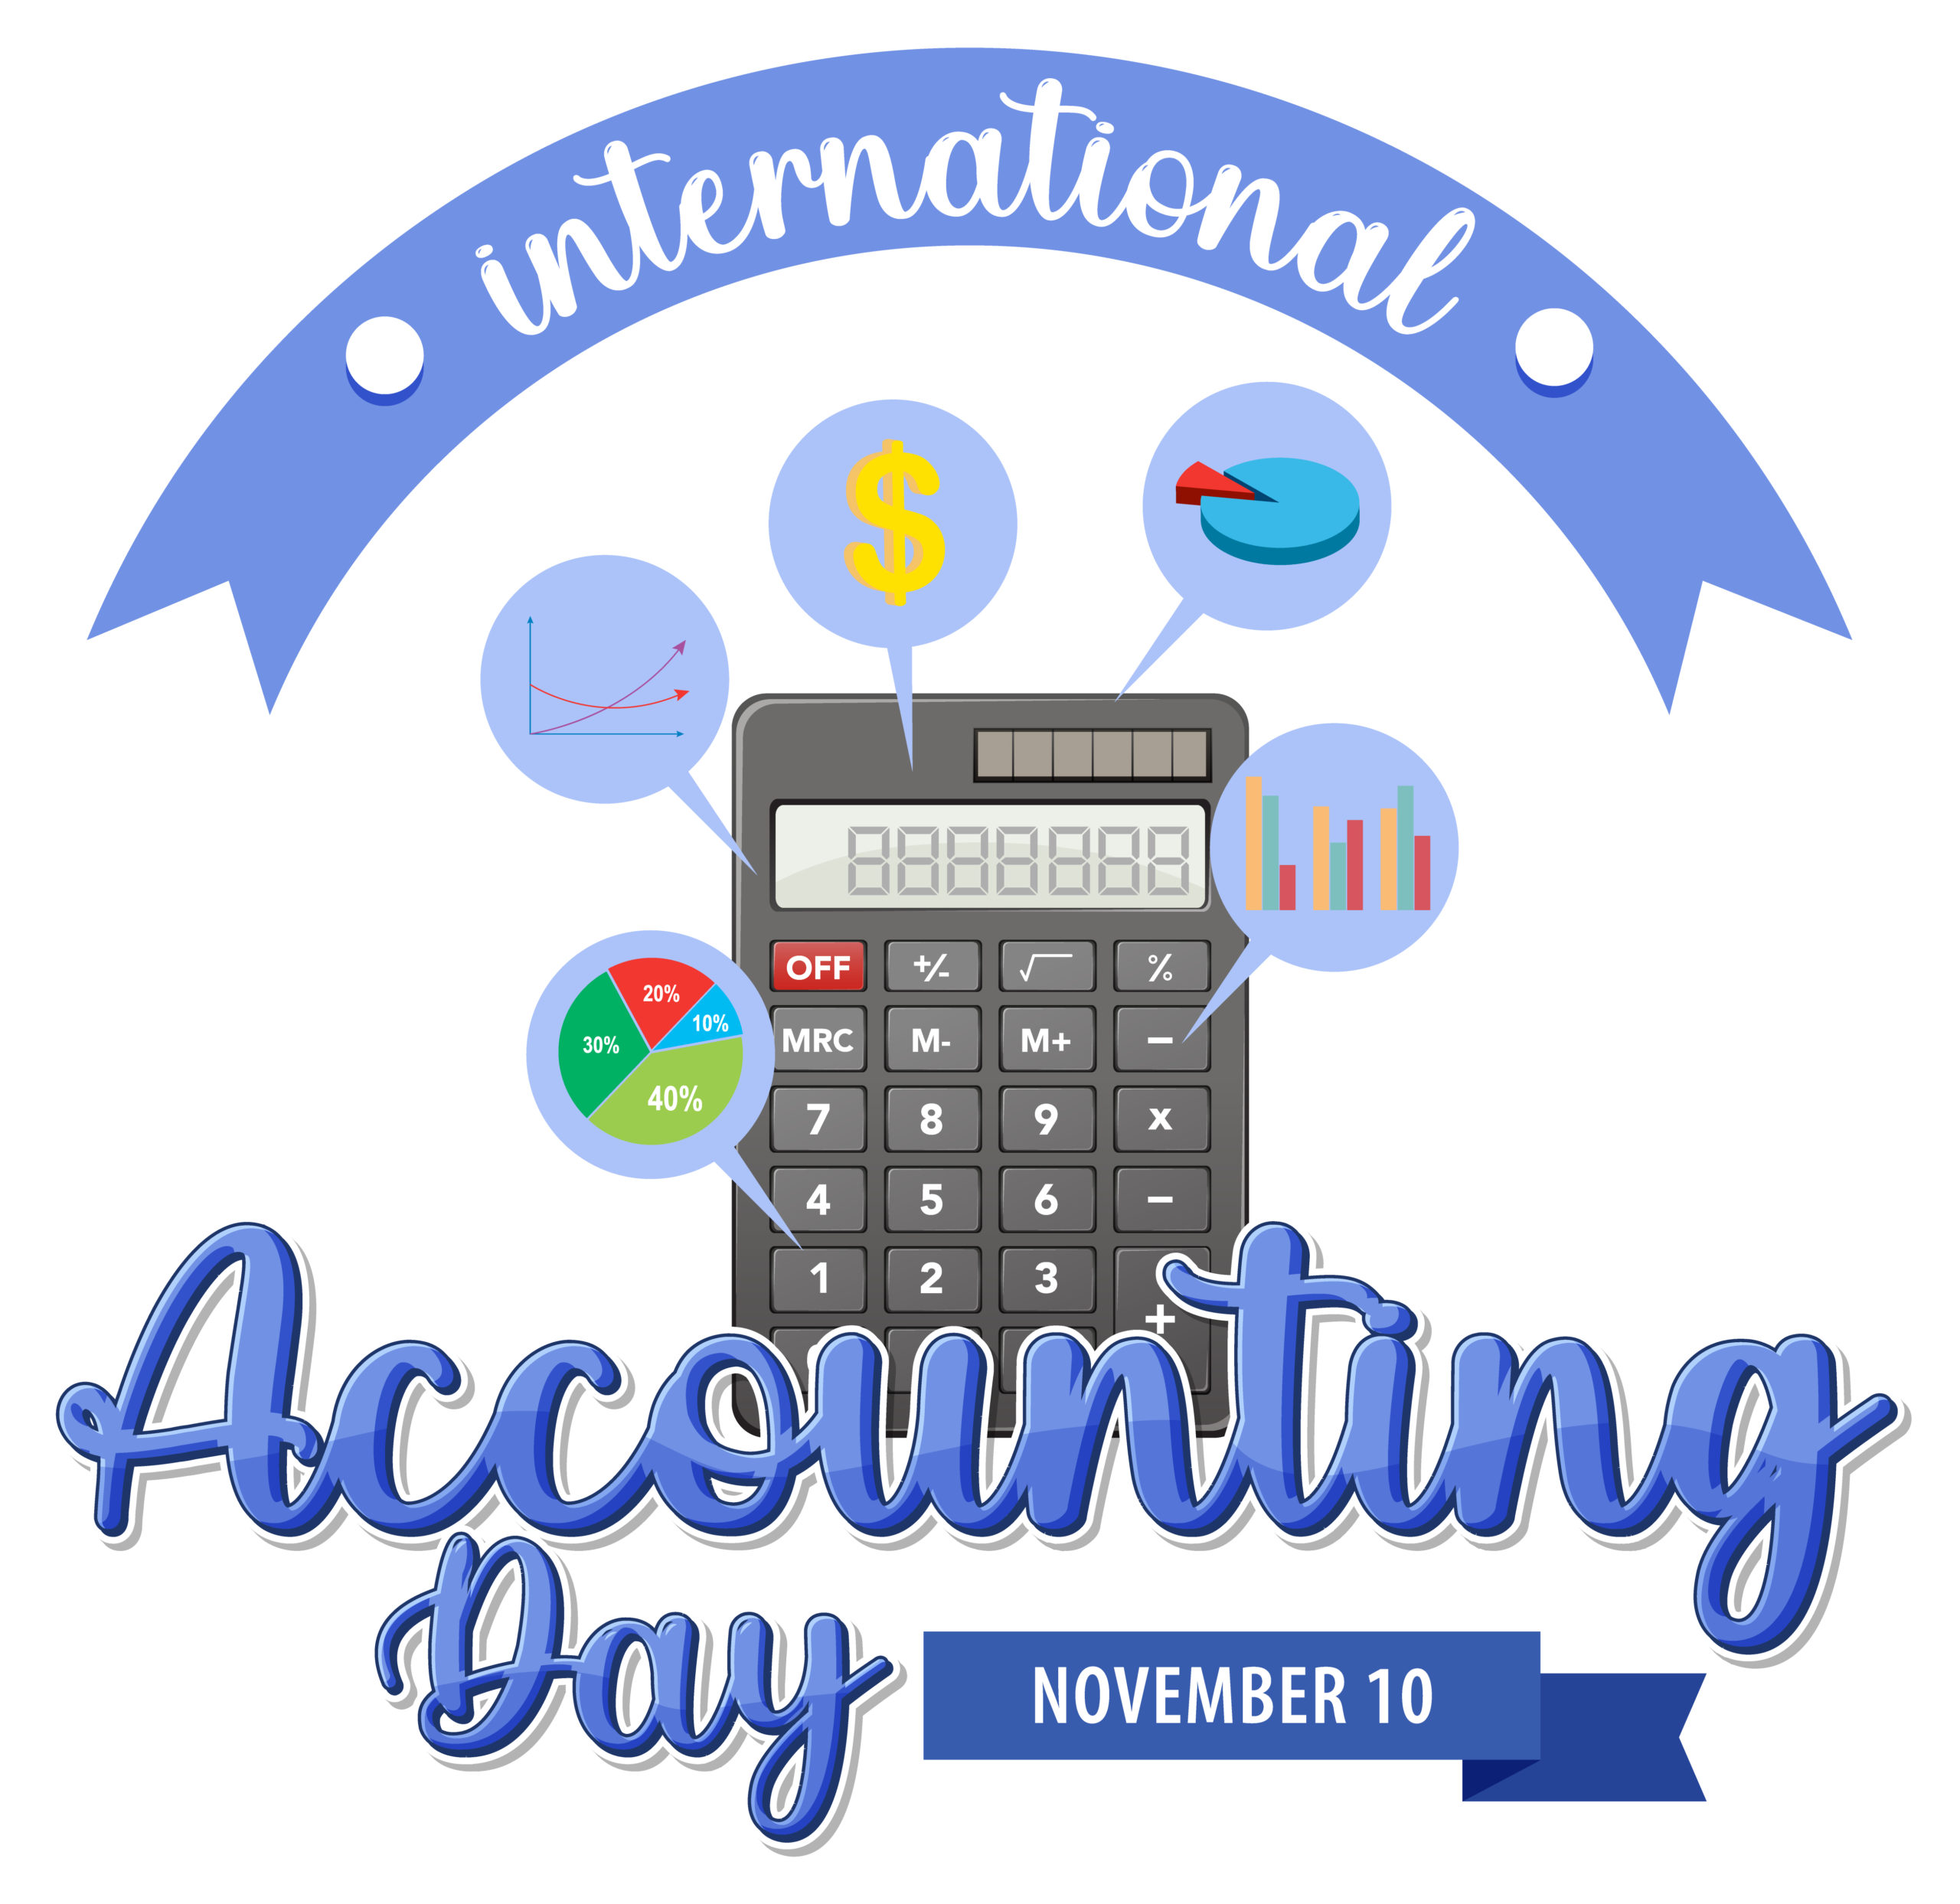 International Accounting Day 2022 Quotes, Images, Messages, Sayings, Wishes, Greetings, and Posters